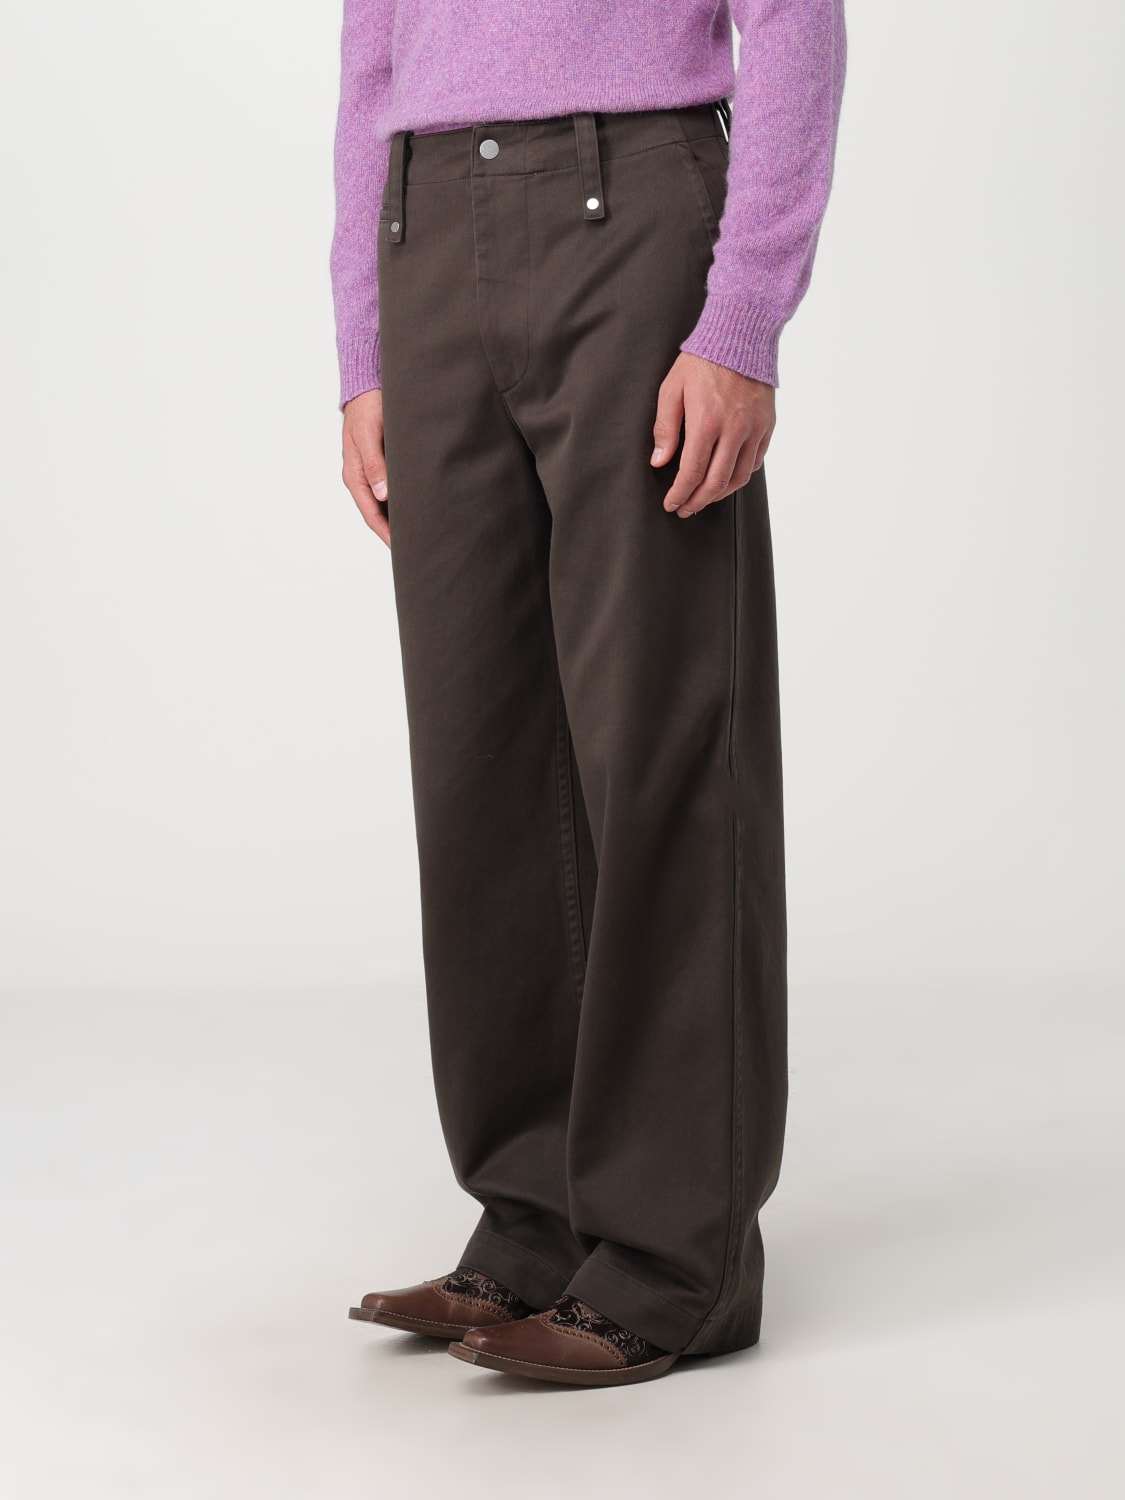 Burberry Trousers for Men - Vestiaire Collective